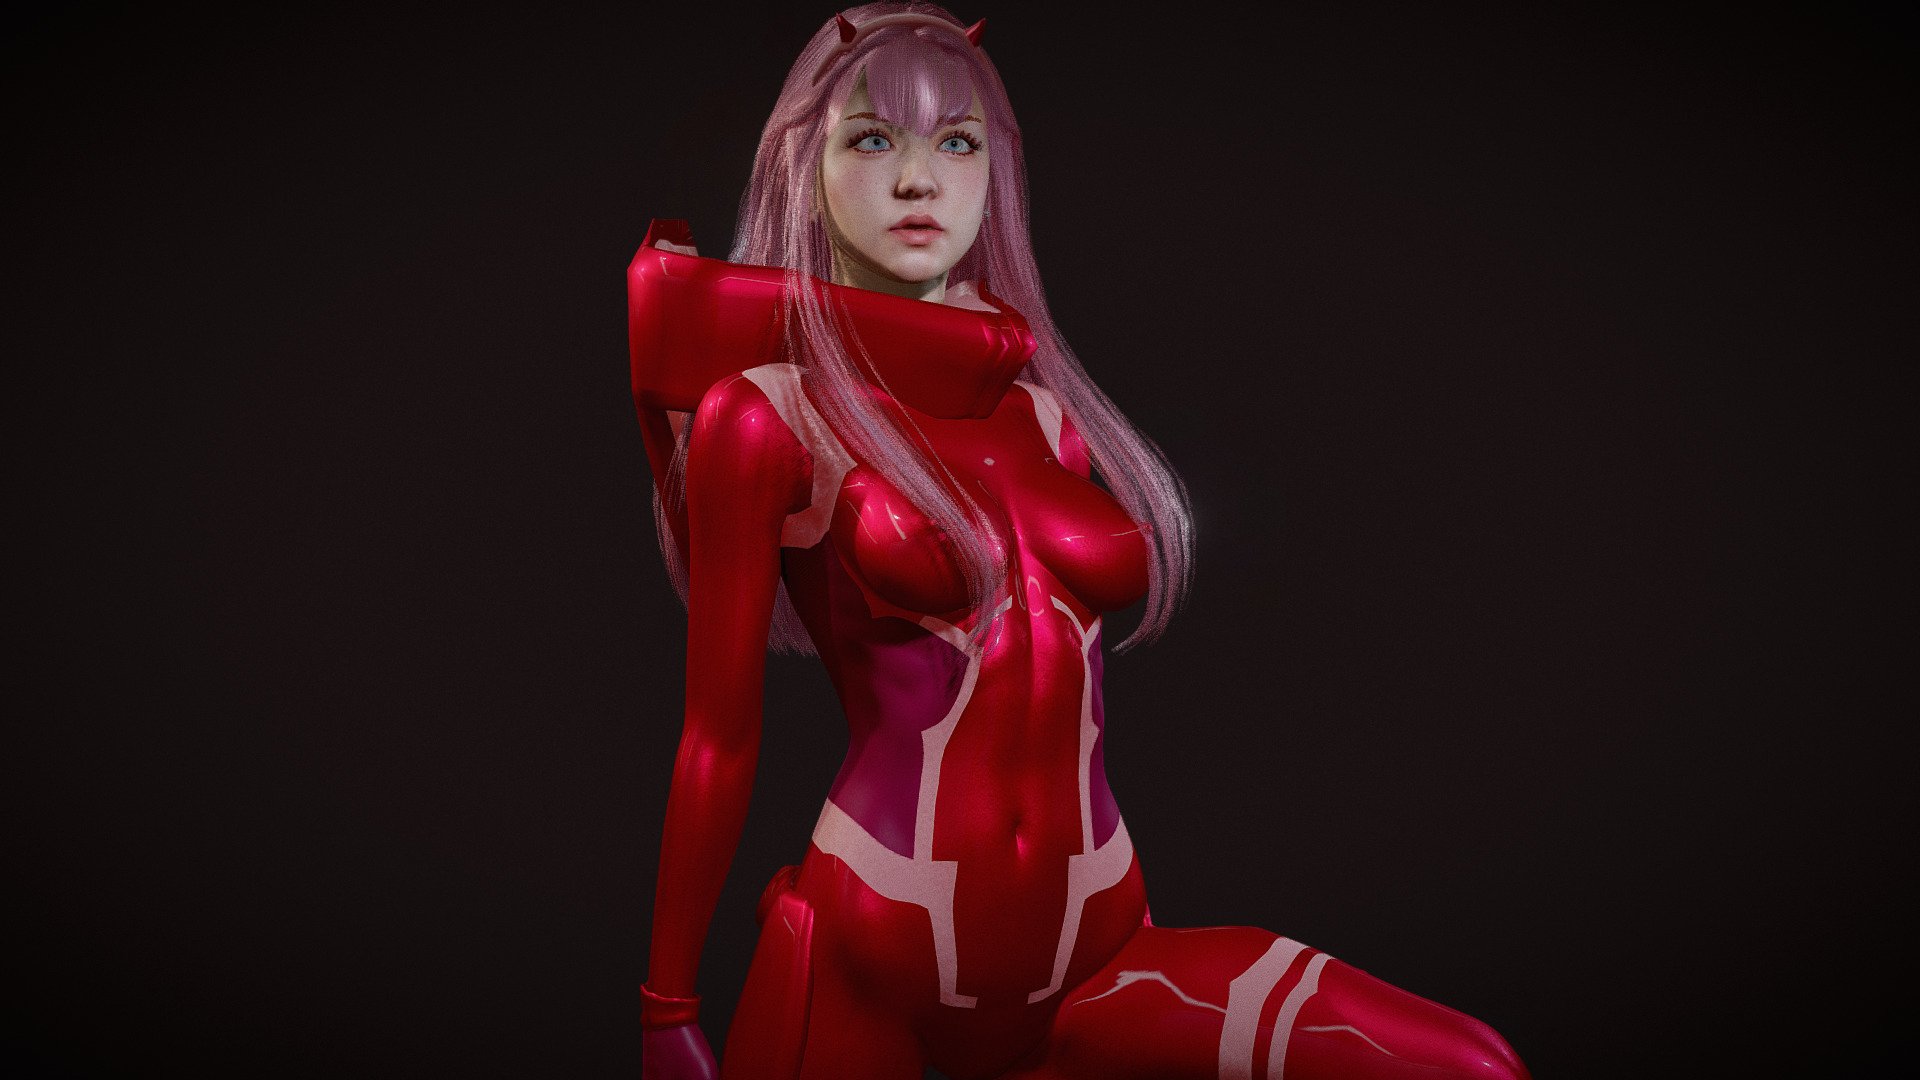 Zero Two semi realistic anime girl . Model in Blender file. Fully rigged. SSS subsurface scattering. mixamo bone names for animation. includes 2 skin materials and 1 extra shapekey 3d model